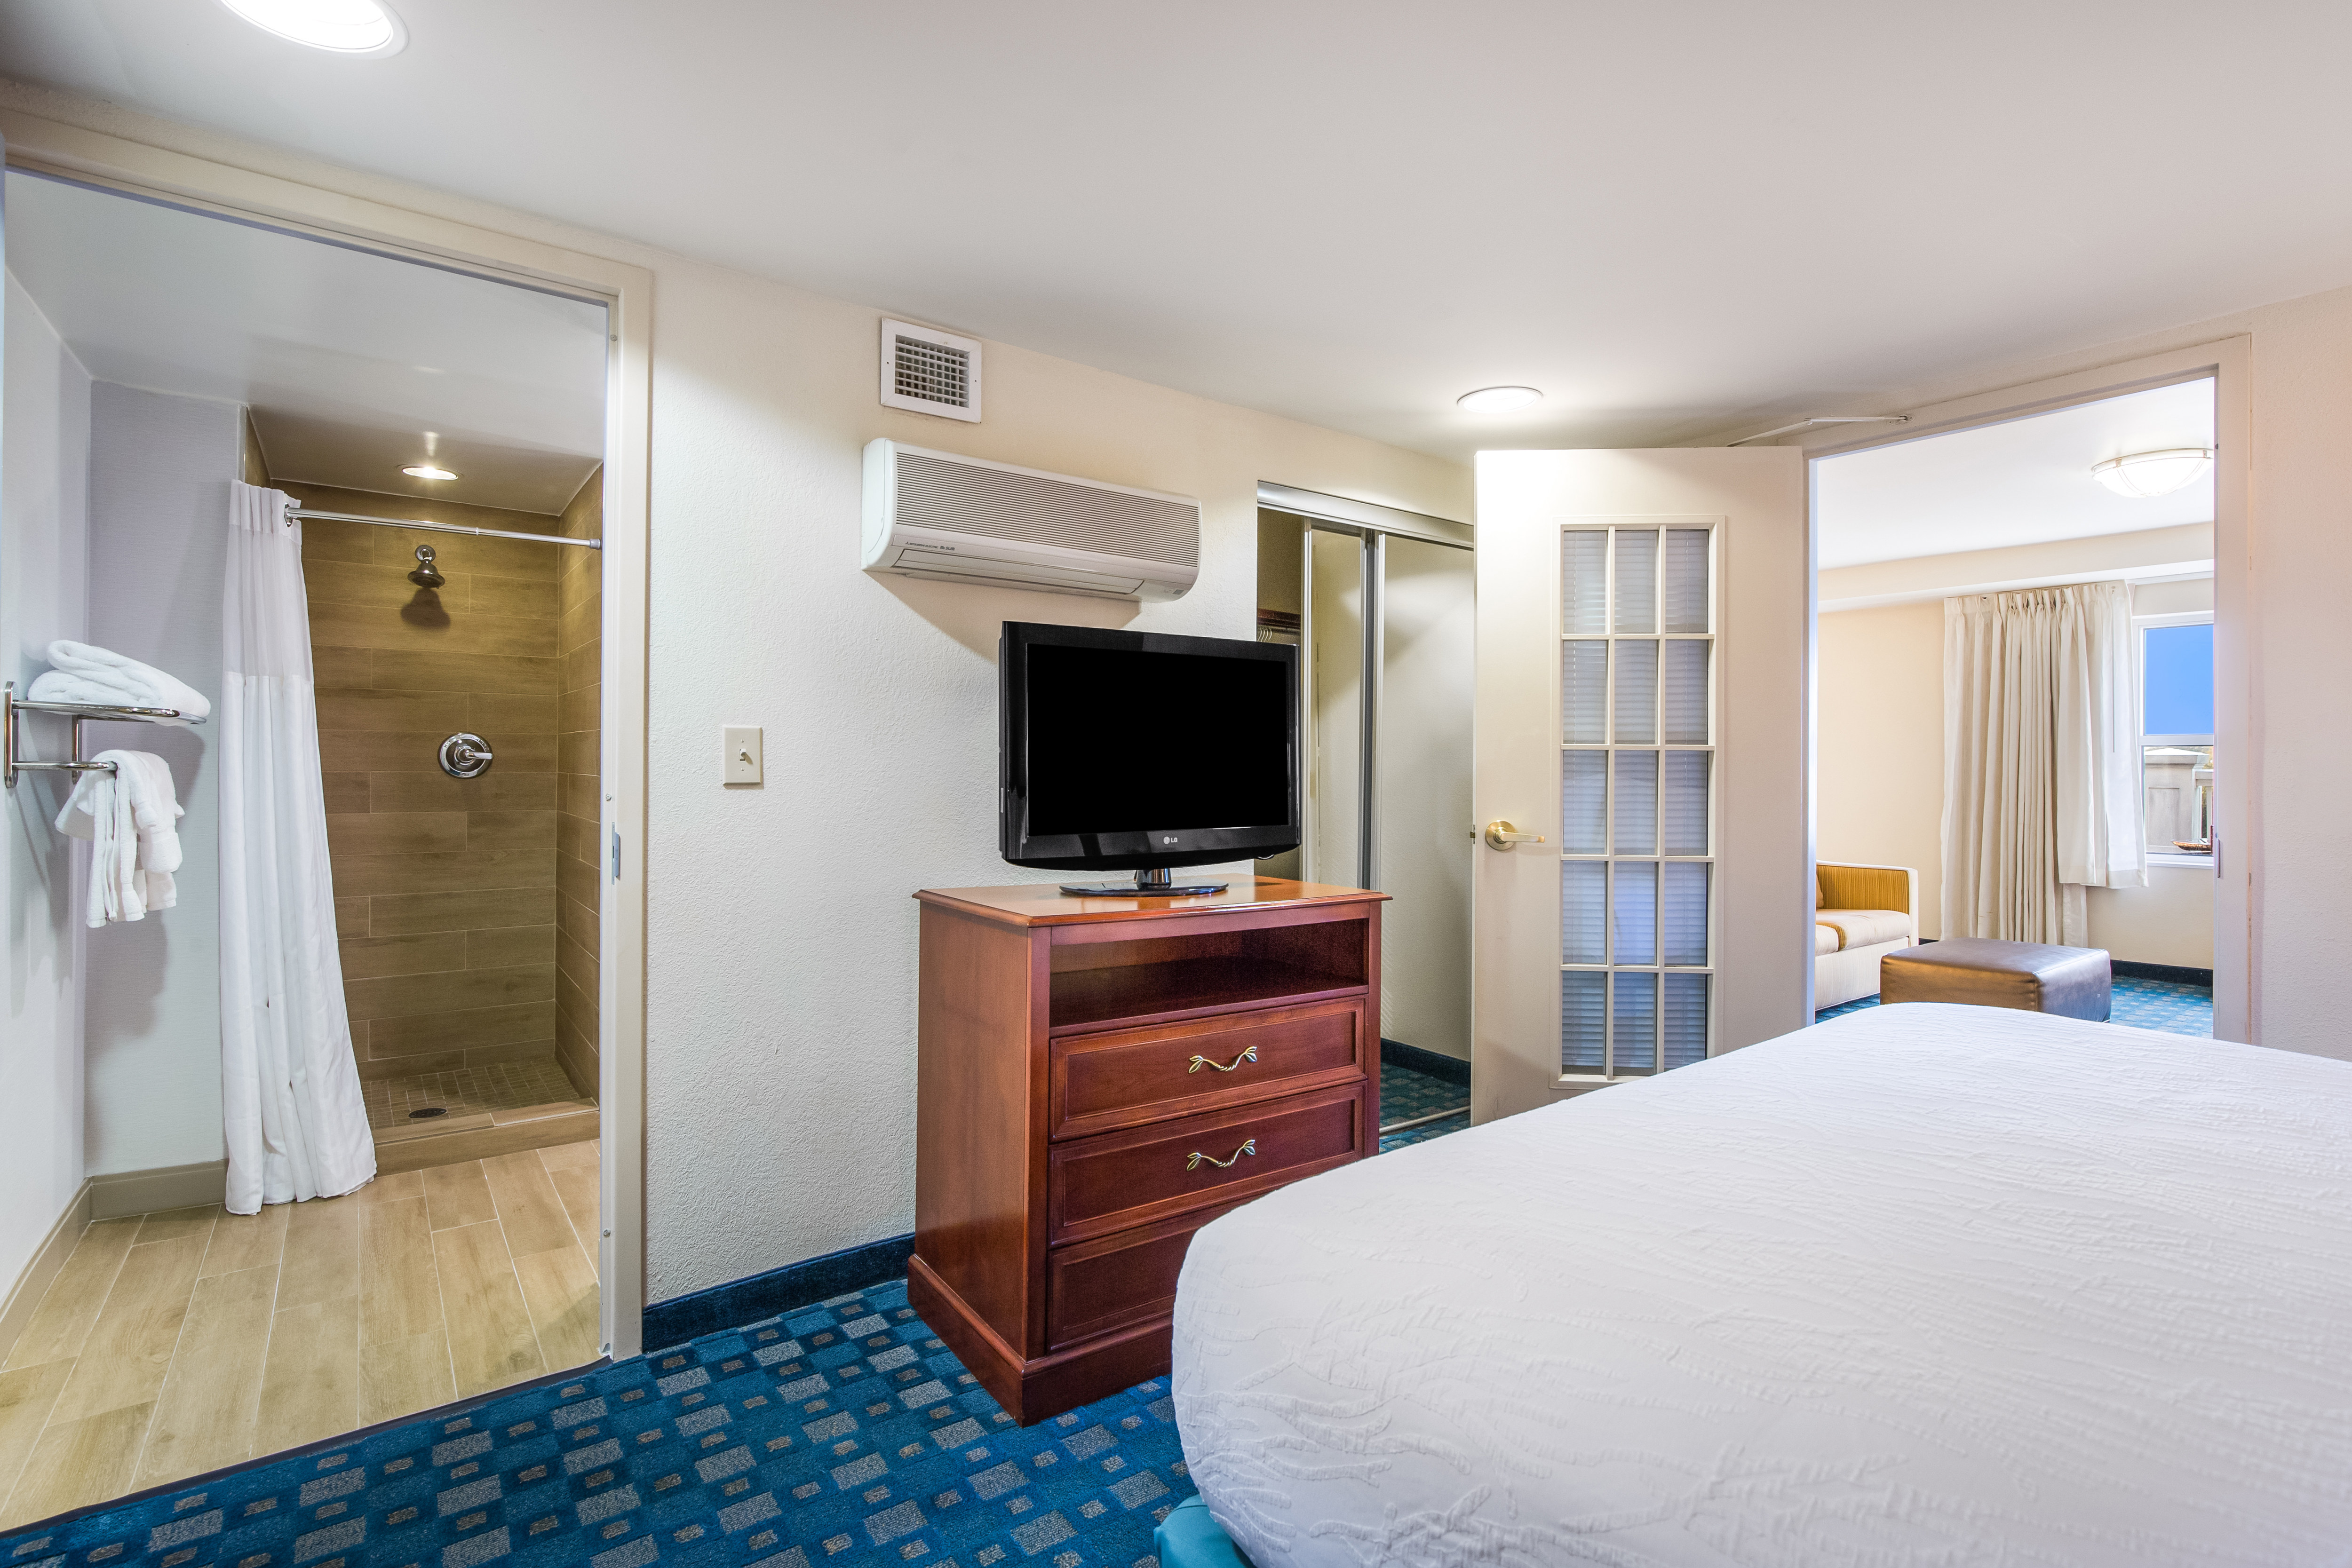 Guest Suite, King Bed, TV, Partial View of Bathroom and Living Area